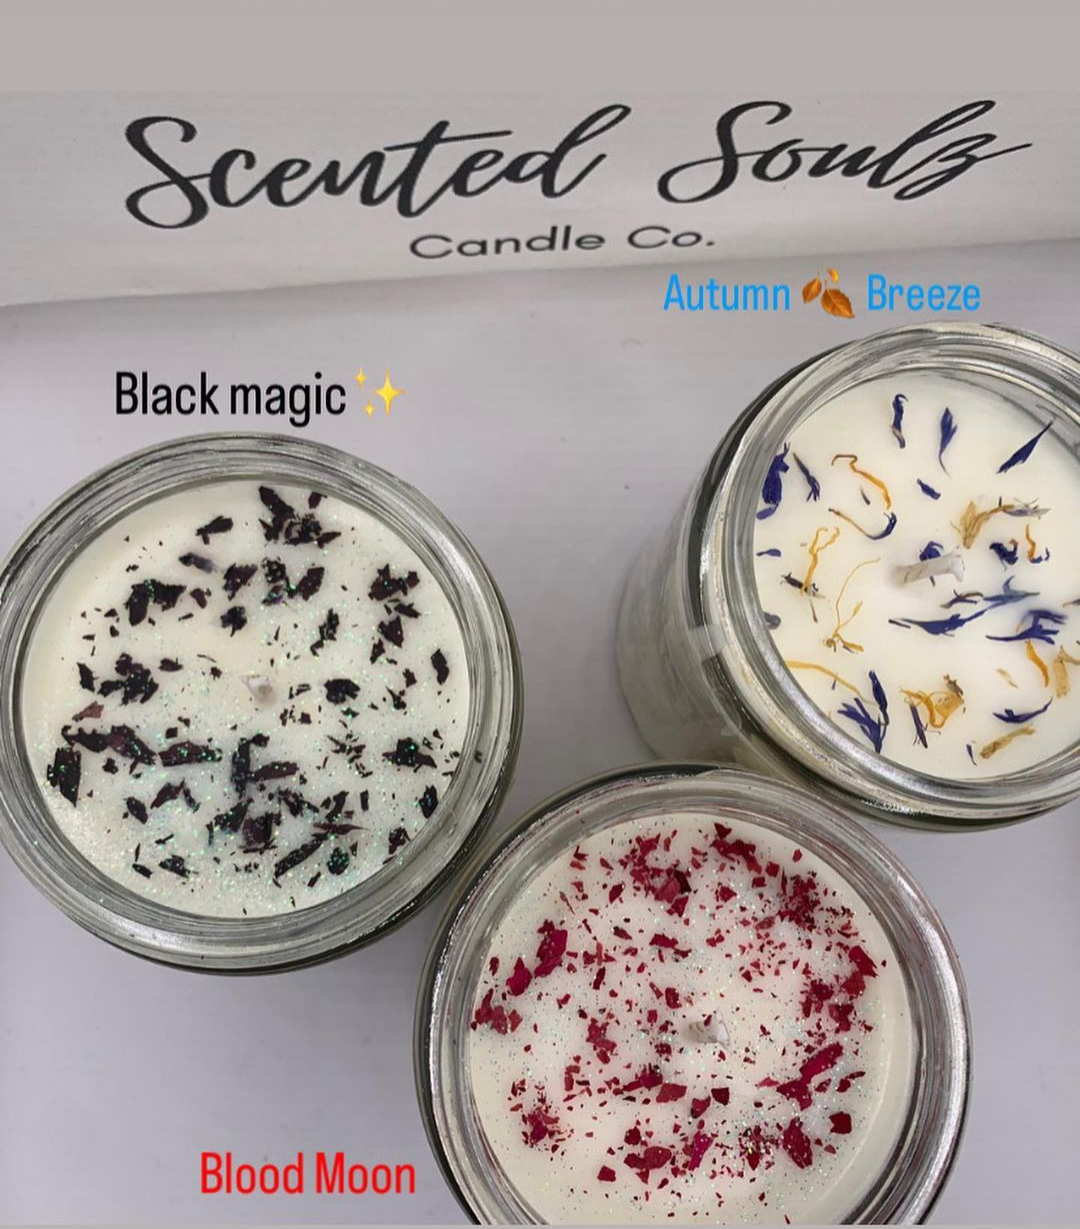 Scented Soulz Co. Contact Seller Directly for purchase.